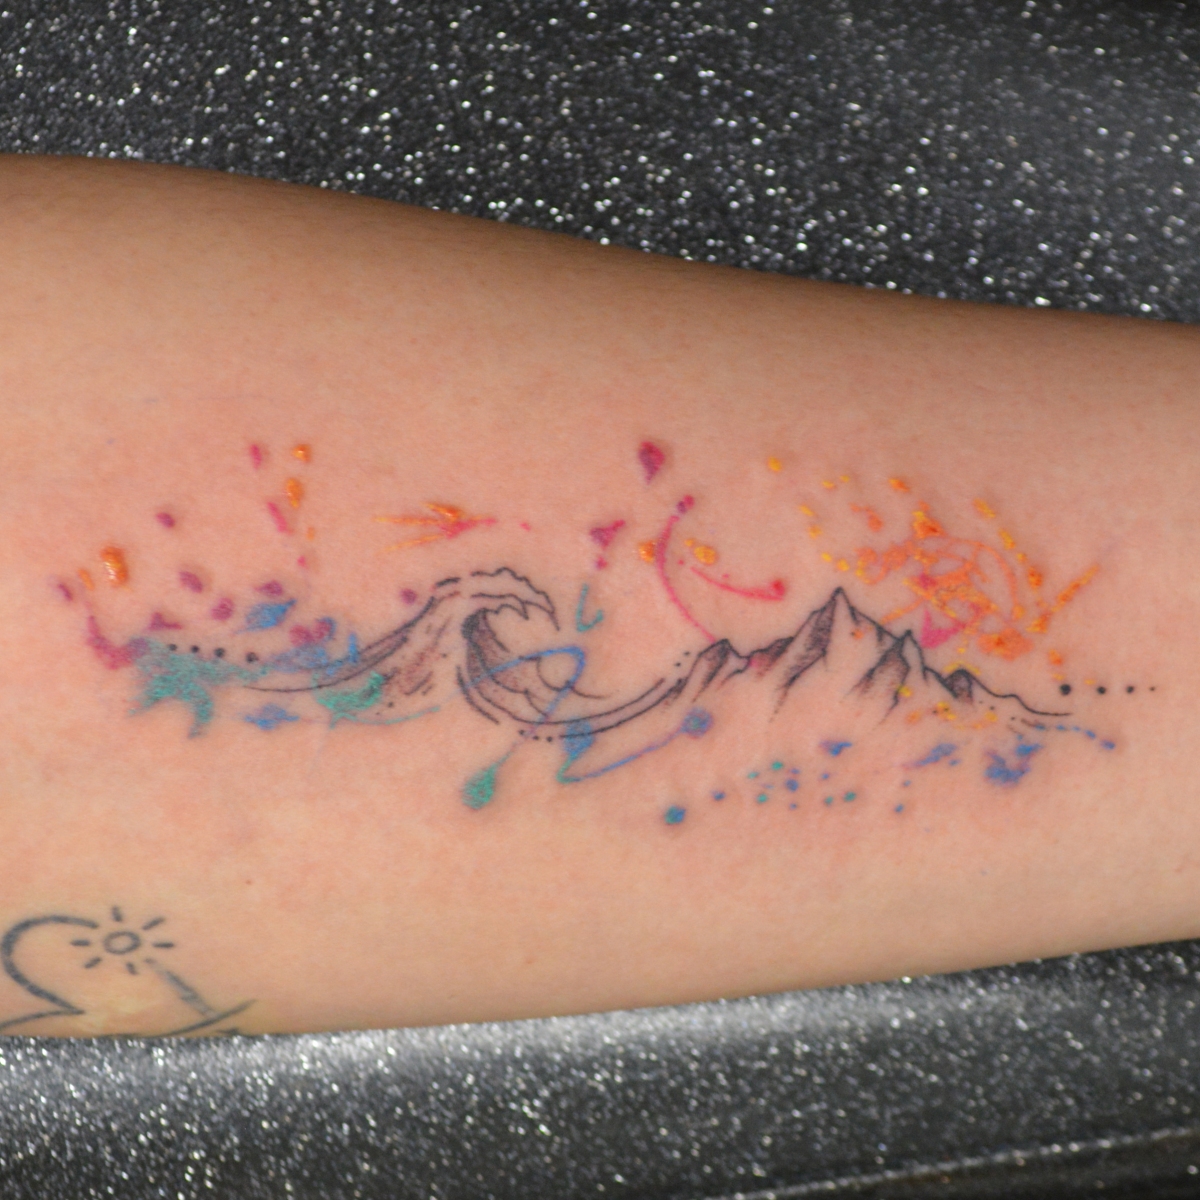 Watercolor Tattoos to Inspire Your Next Work of Art